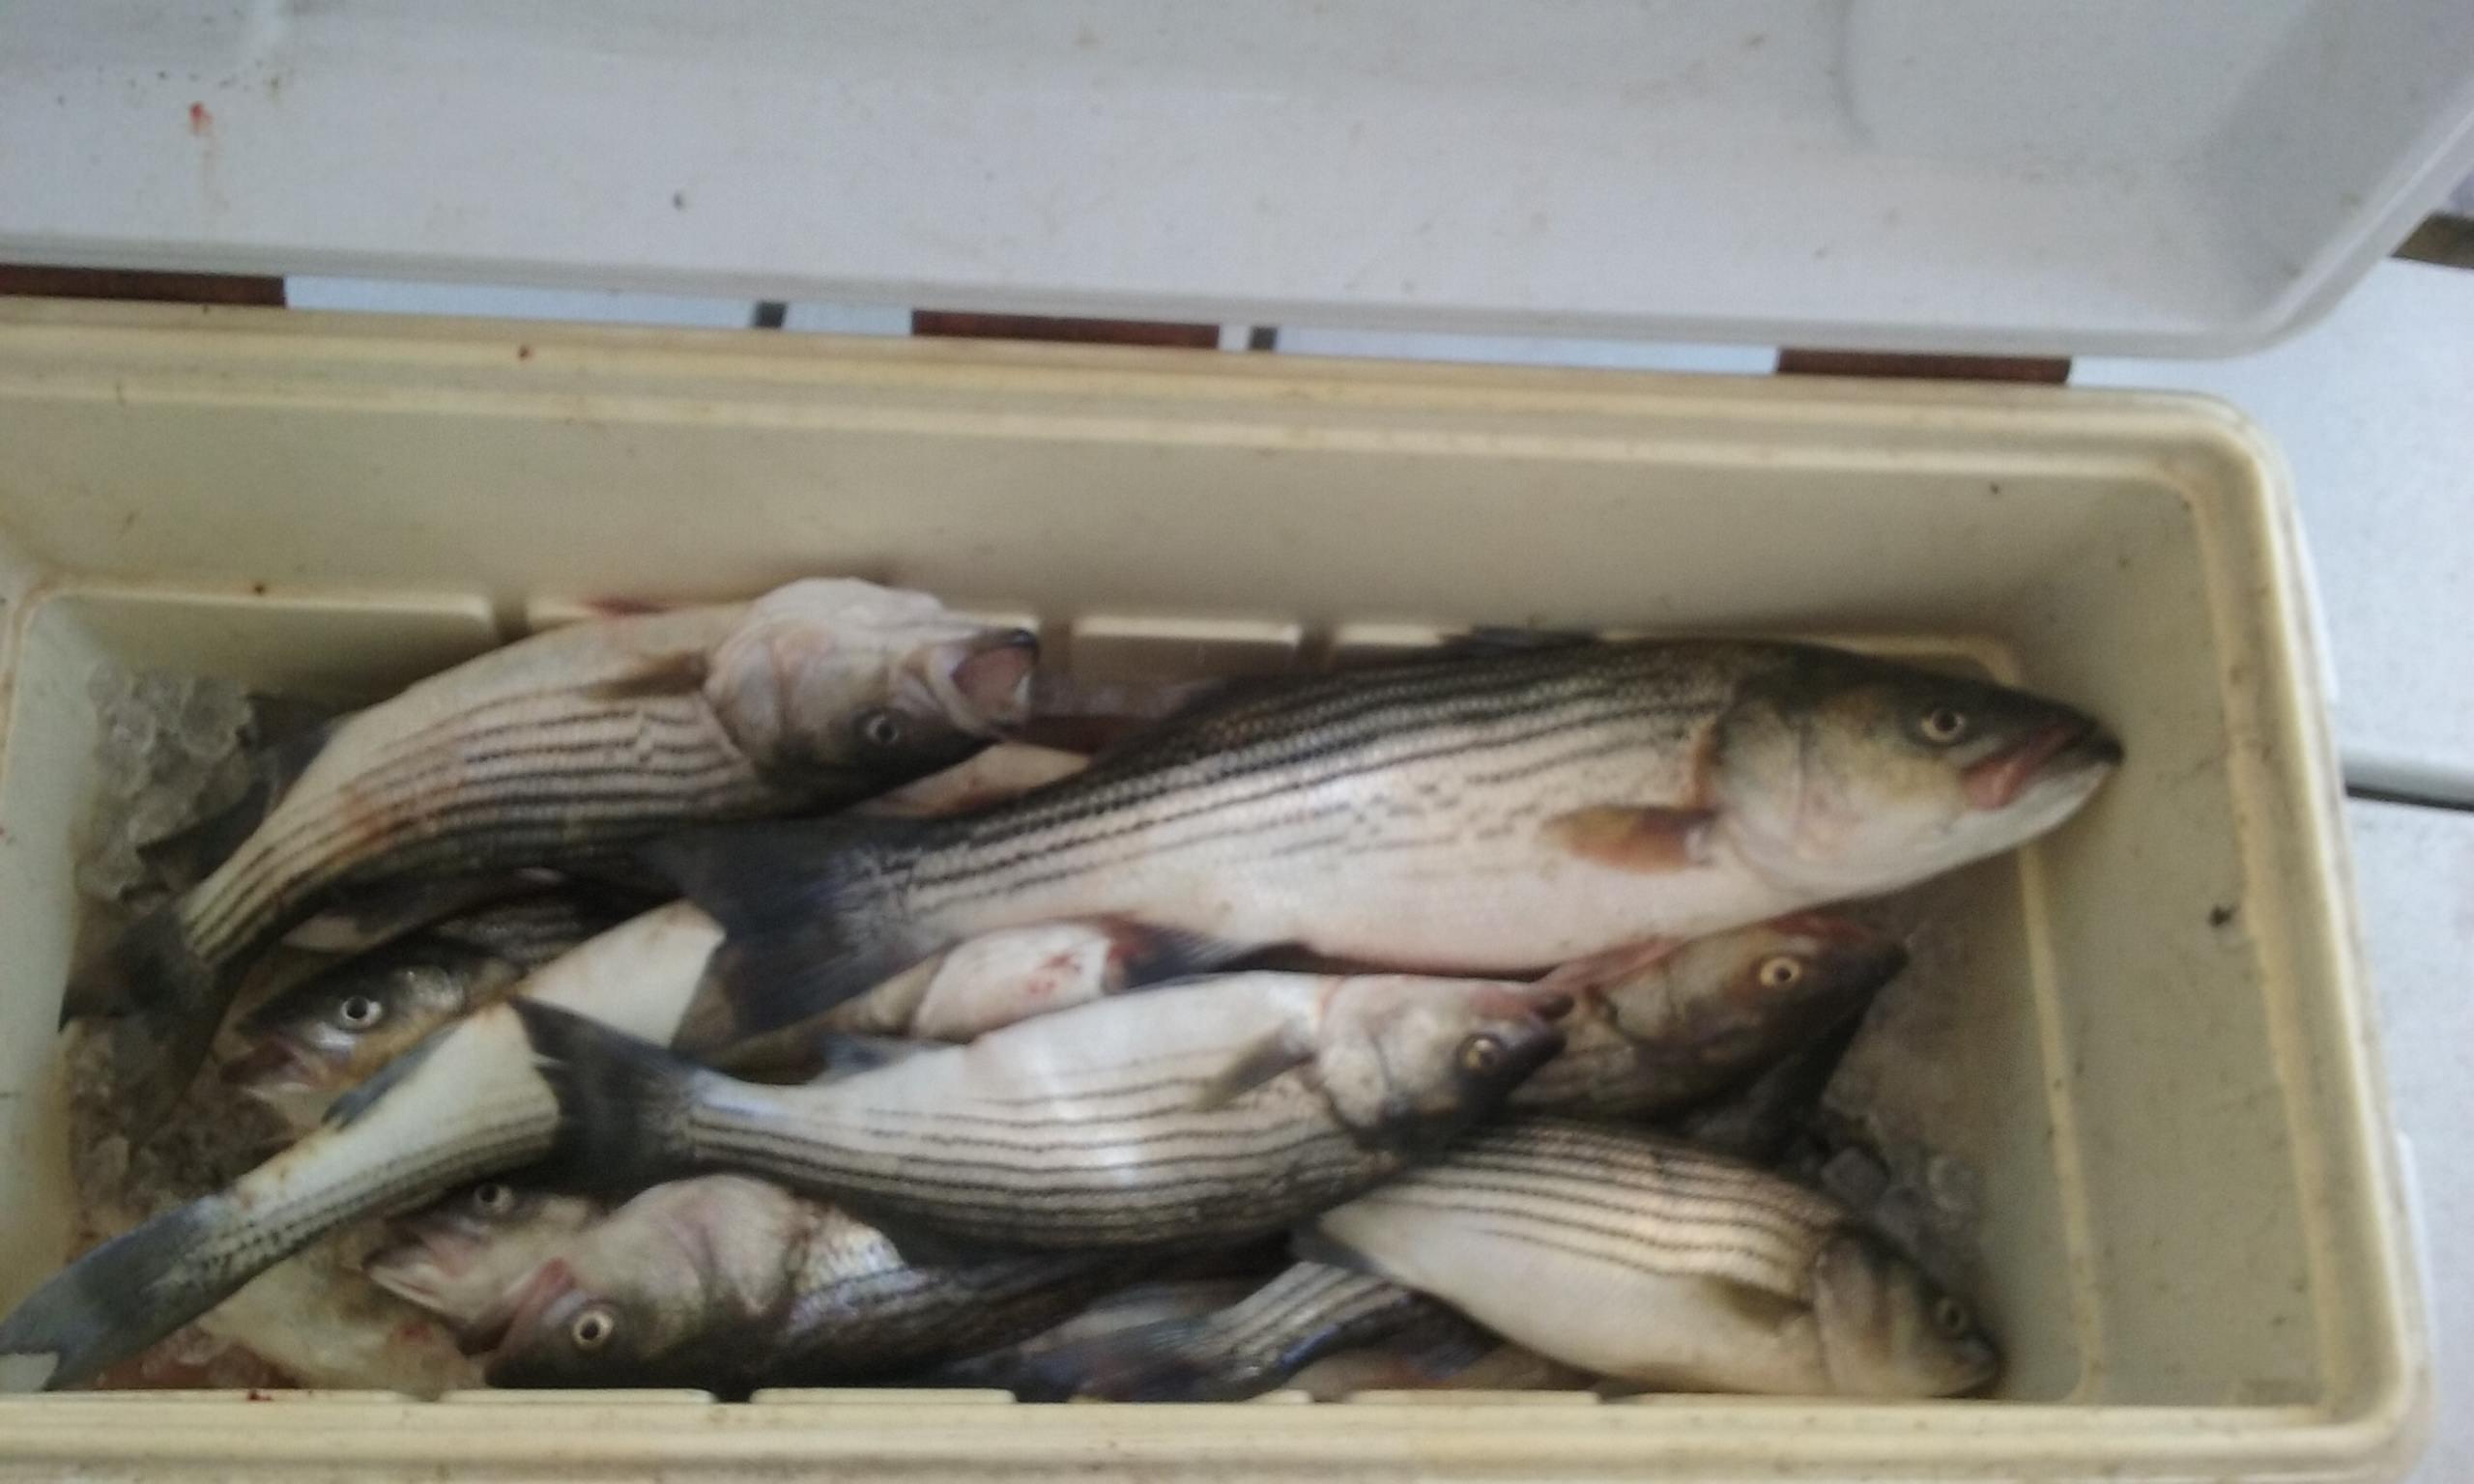 A Limit of Maryland Rockfish for 10 People!